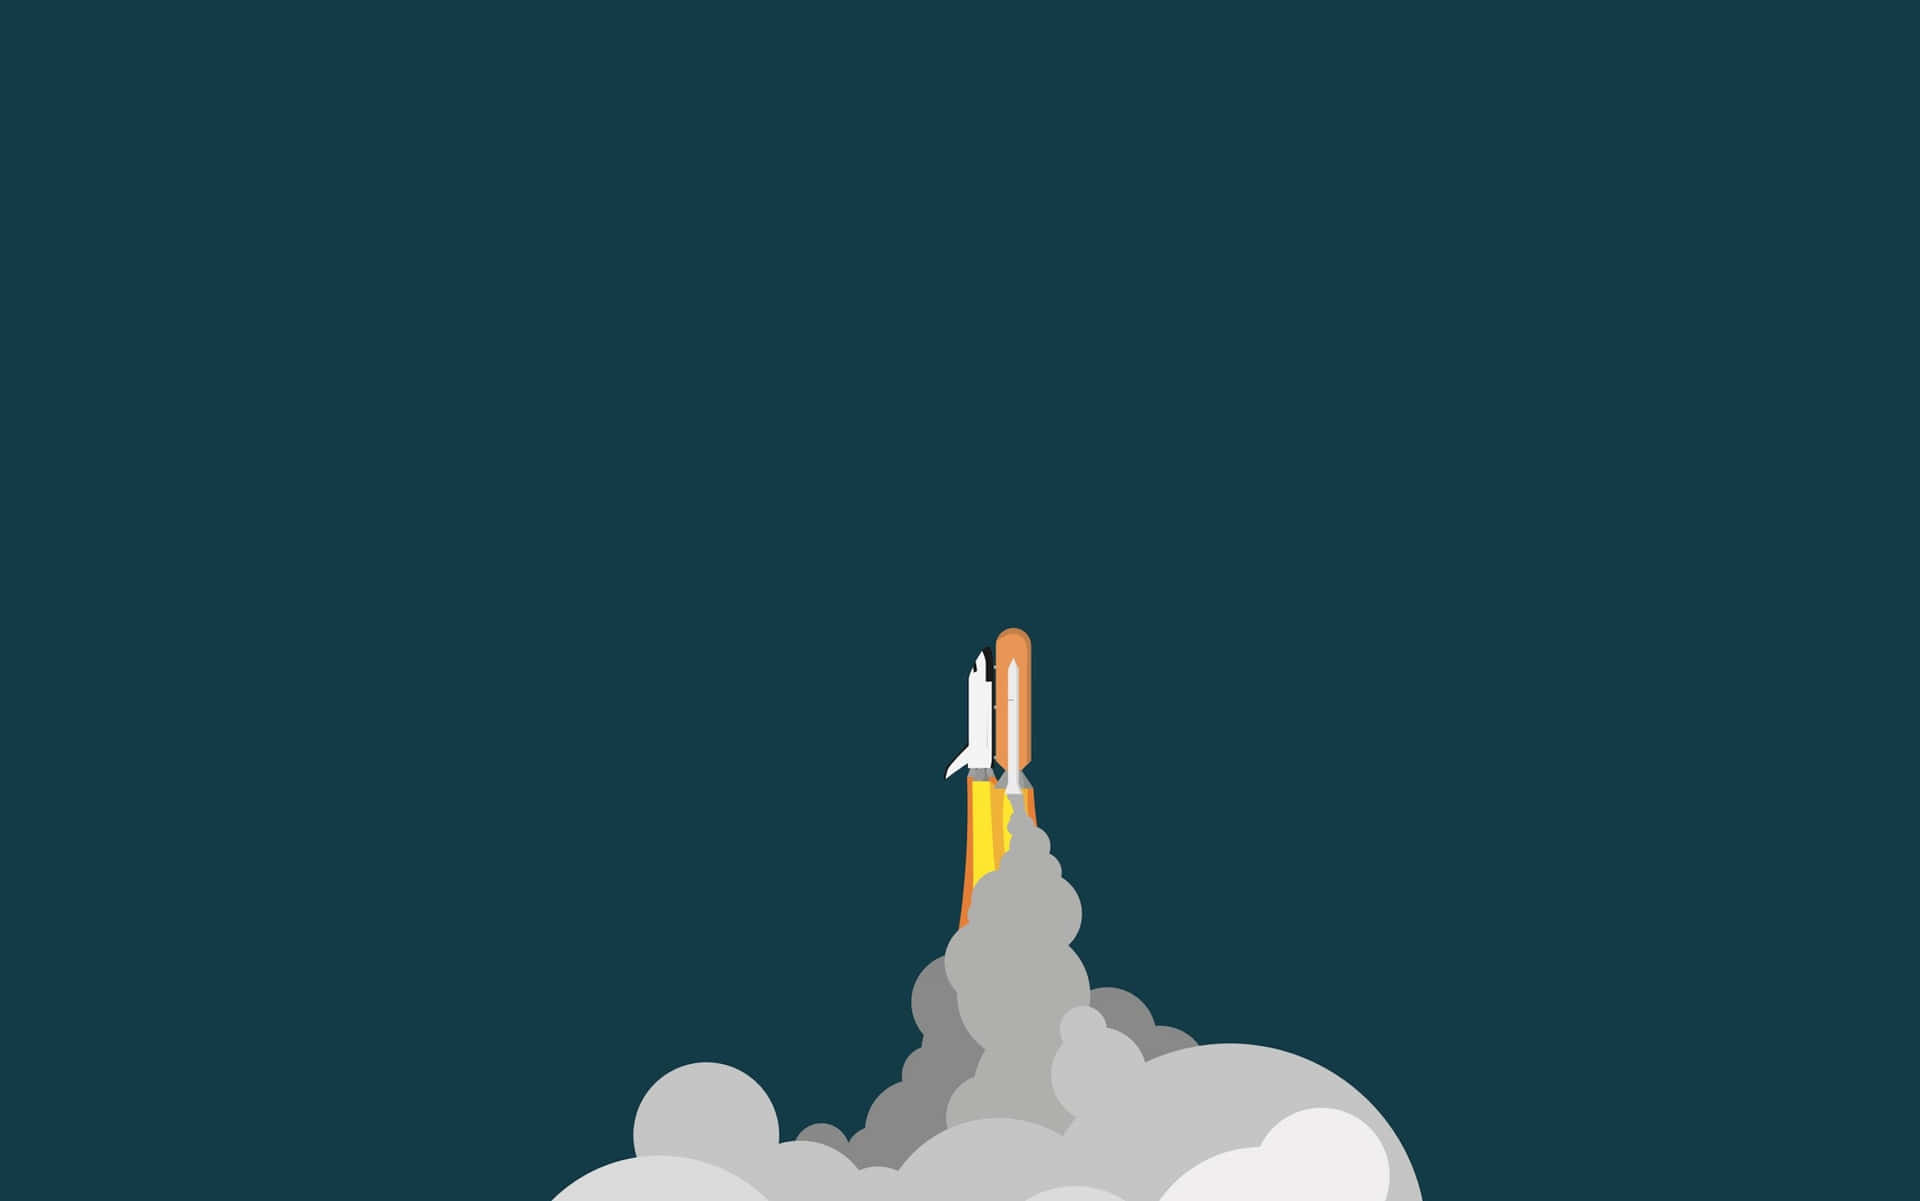 A Space Shuttle Is Taking Off In The Sky Wallpaper